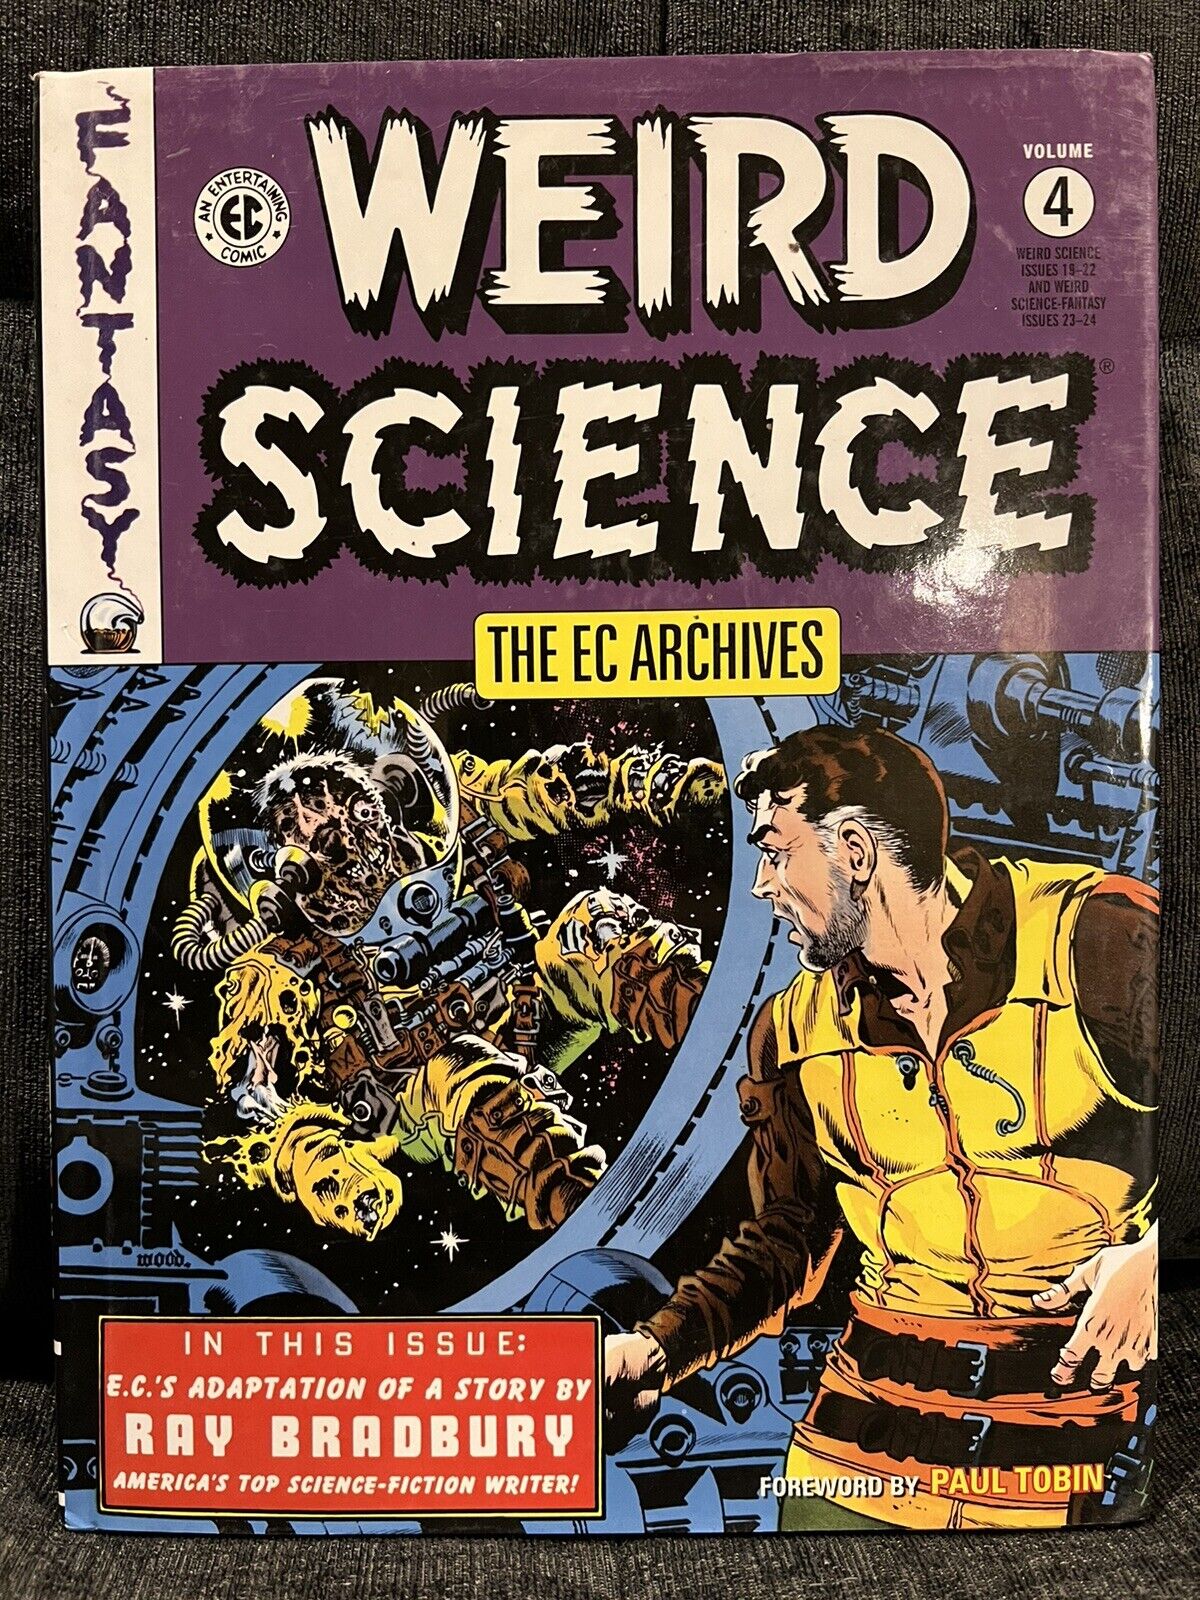 The Ec Archives: Weird Science #4 (Dark Horse Comics July 2015) HC First Edition